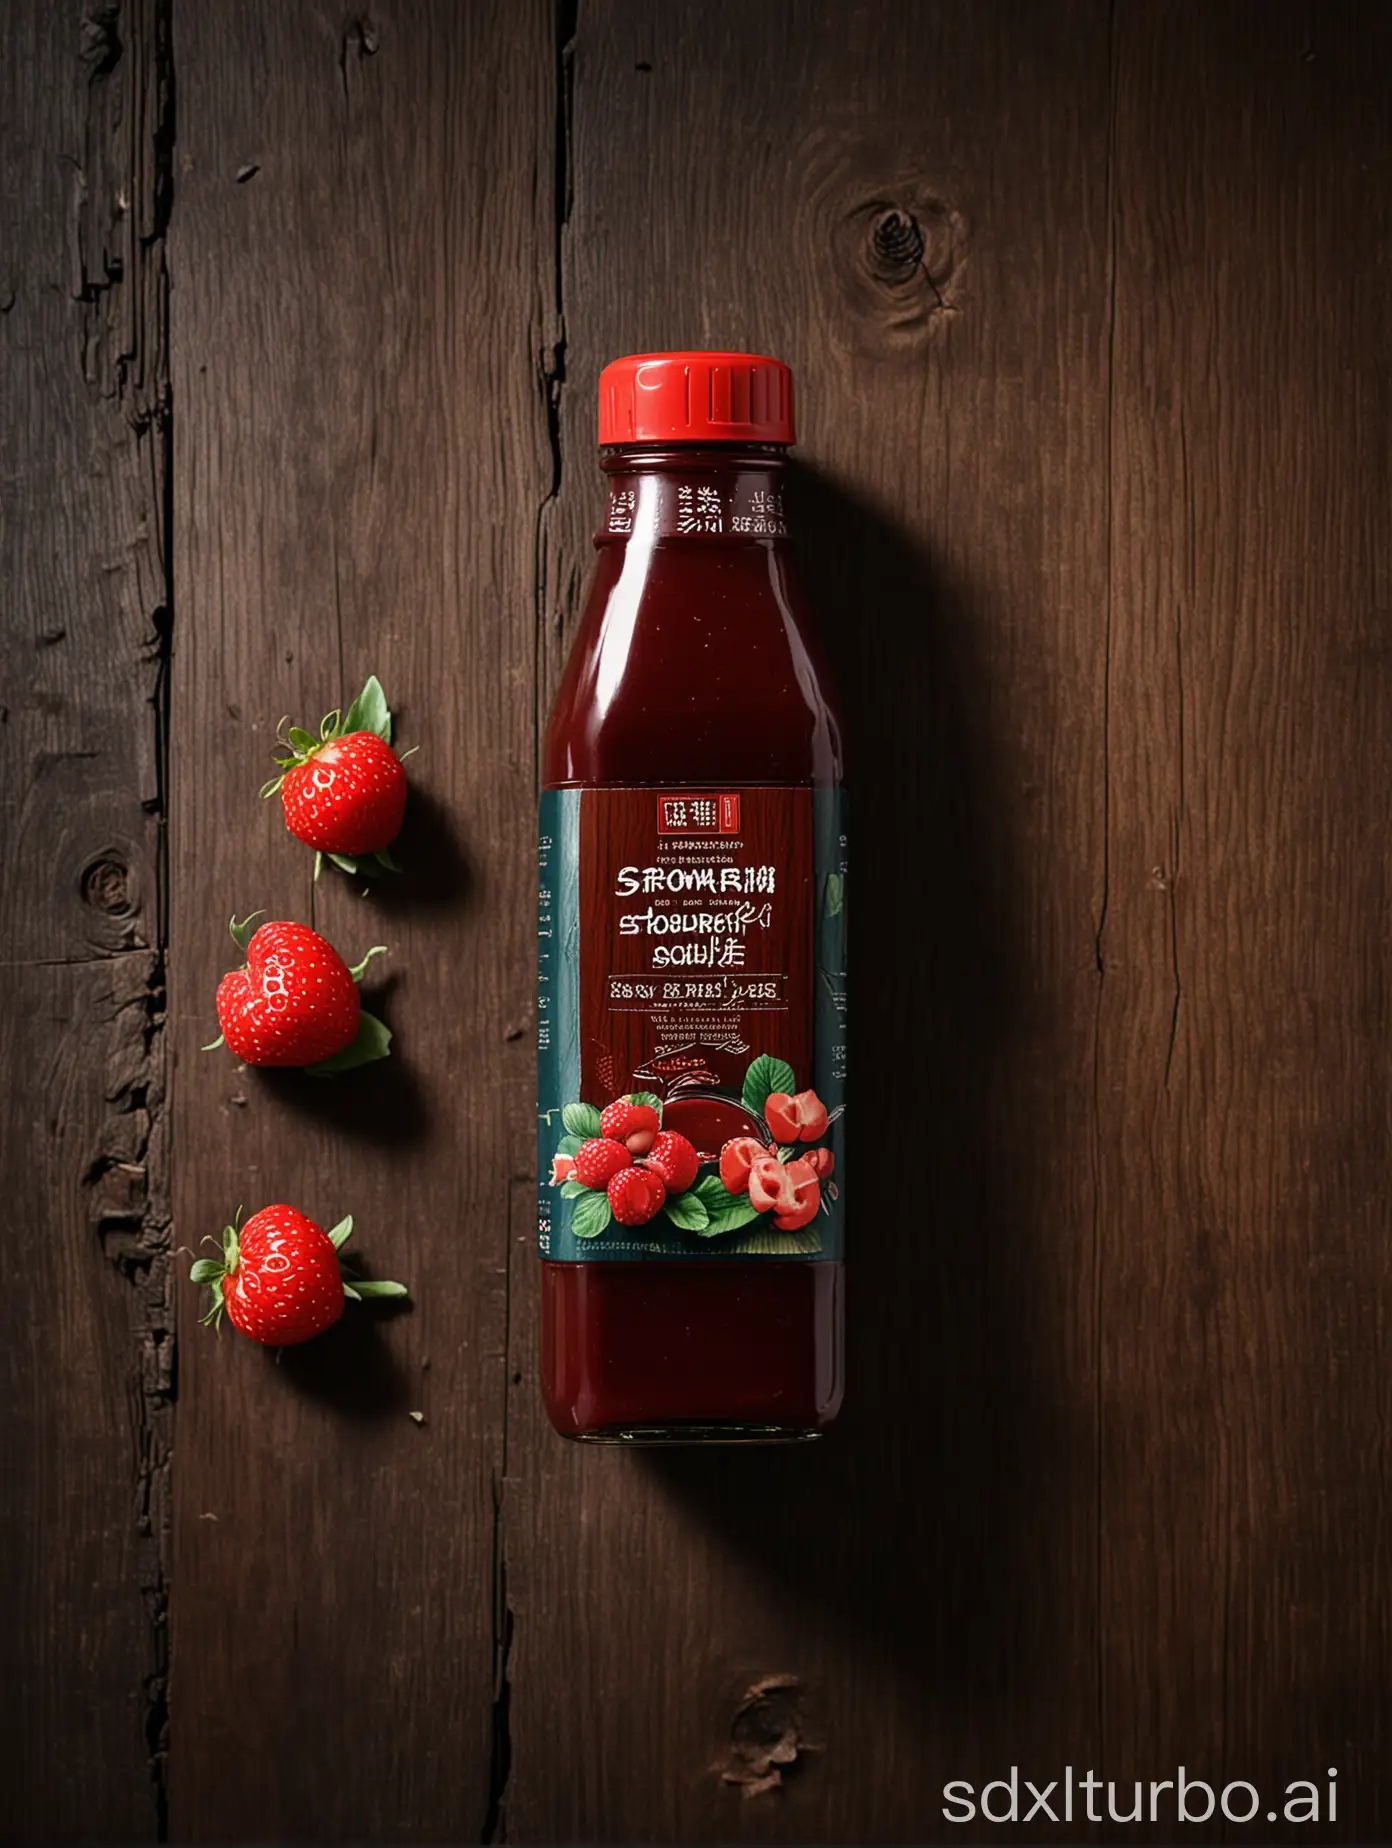 Chinese-Strawberry-Sauce-Bottle-on-Dark-Wood-Table